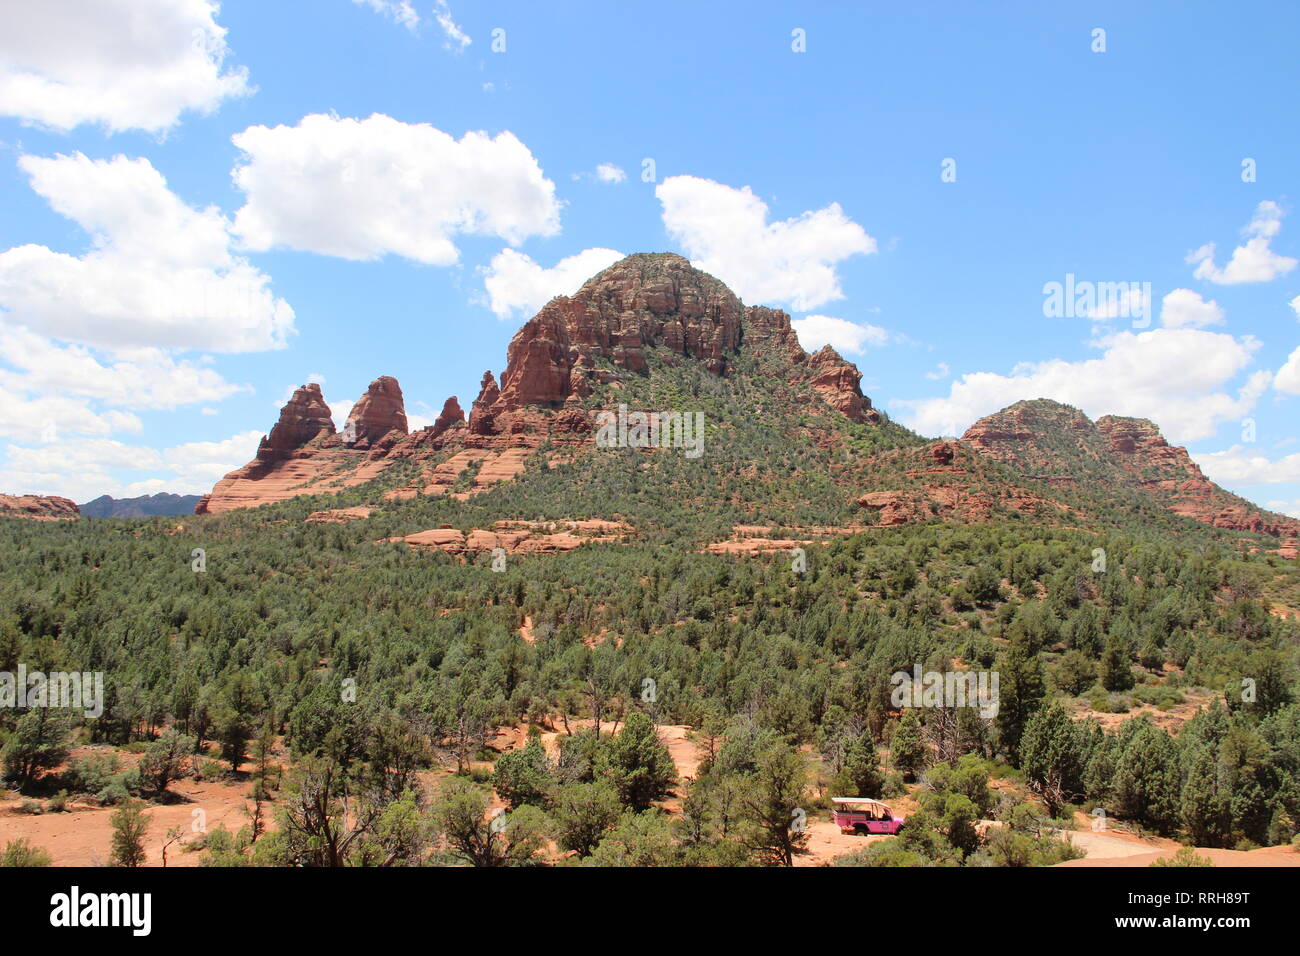 Sedona, Arizona is a photographers dream with its iconic formations of red and orange sandstone ridges, pinnacles, spires, cliffs and rock formations. Stock Photo